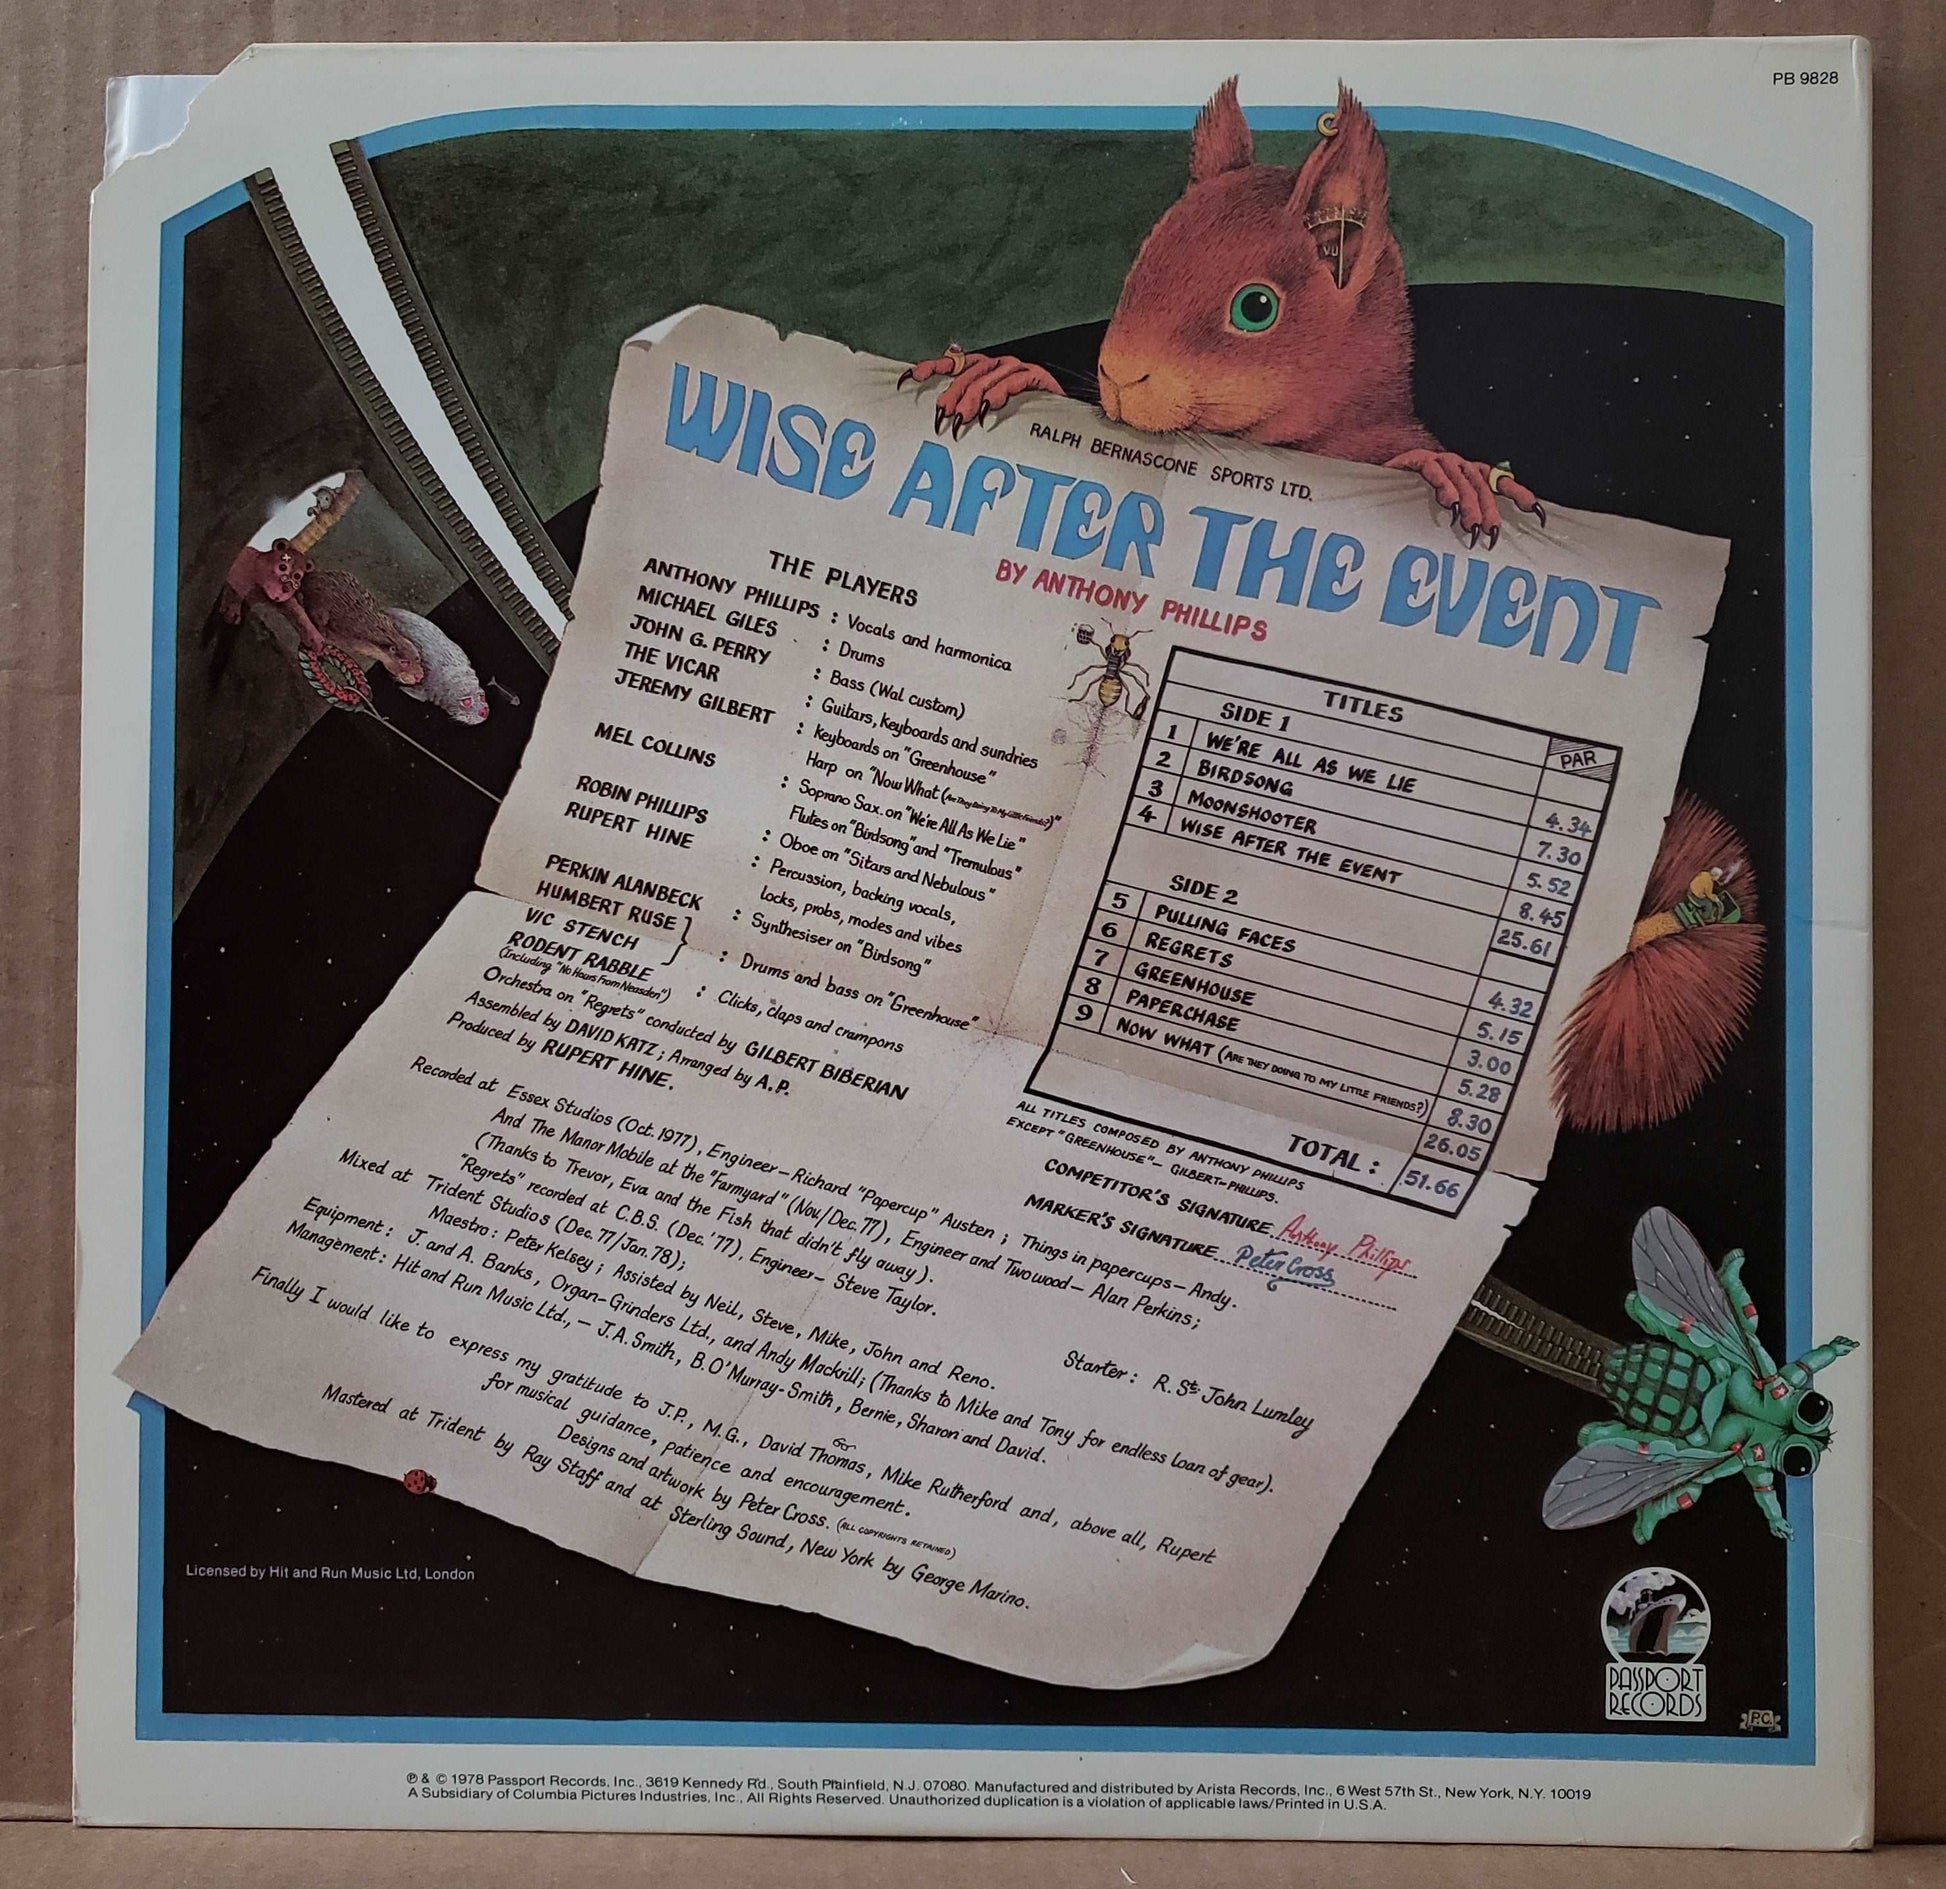 Anthony Phillips - Wise After the Event [1978 Terre Haute] [Used Vinyl Record]